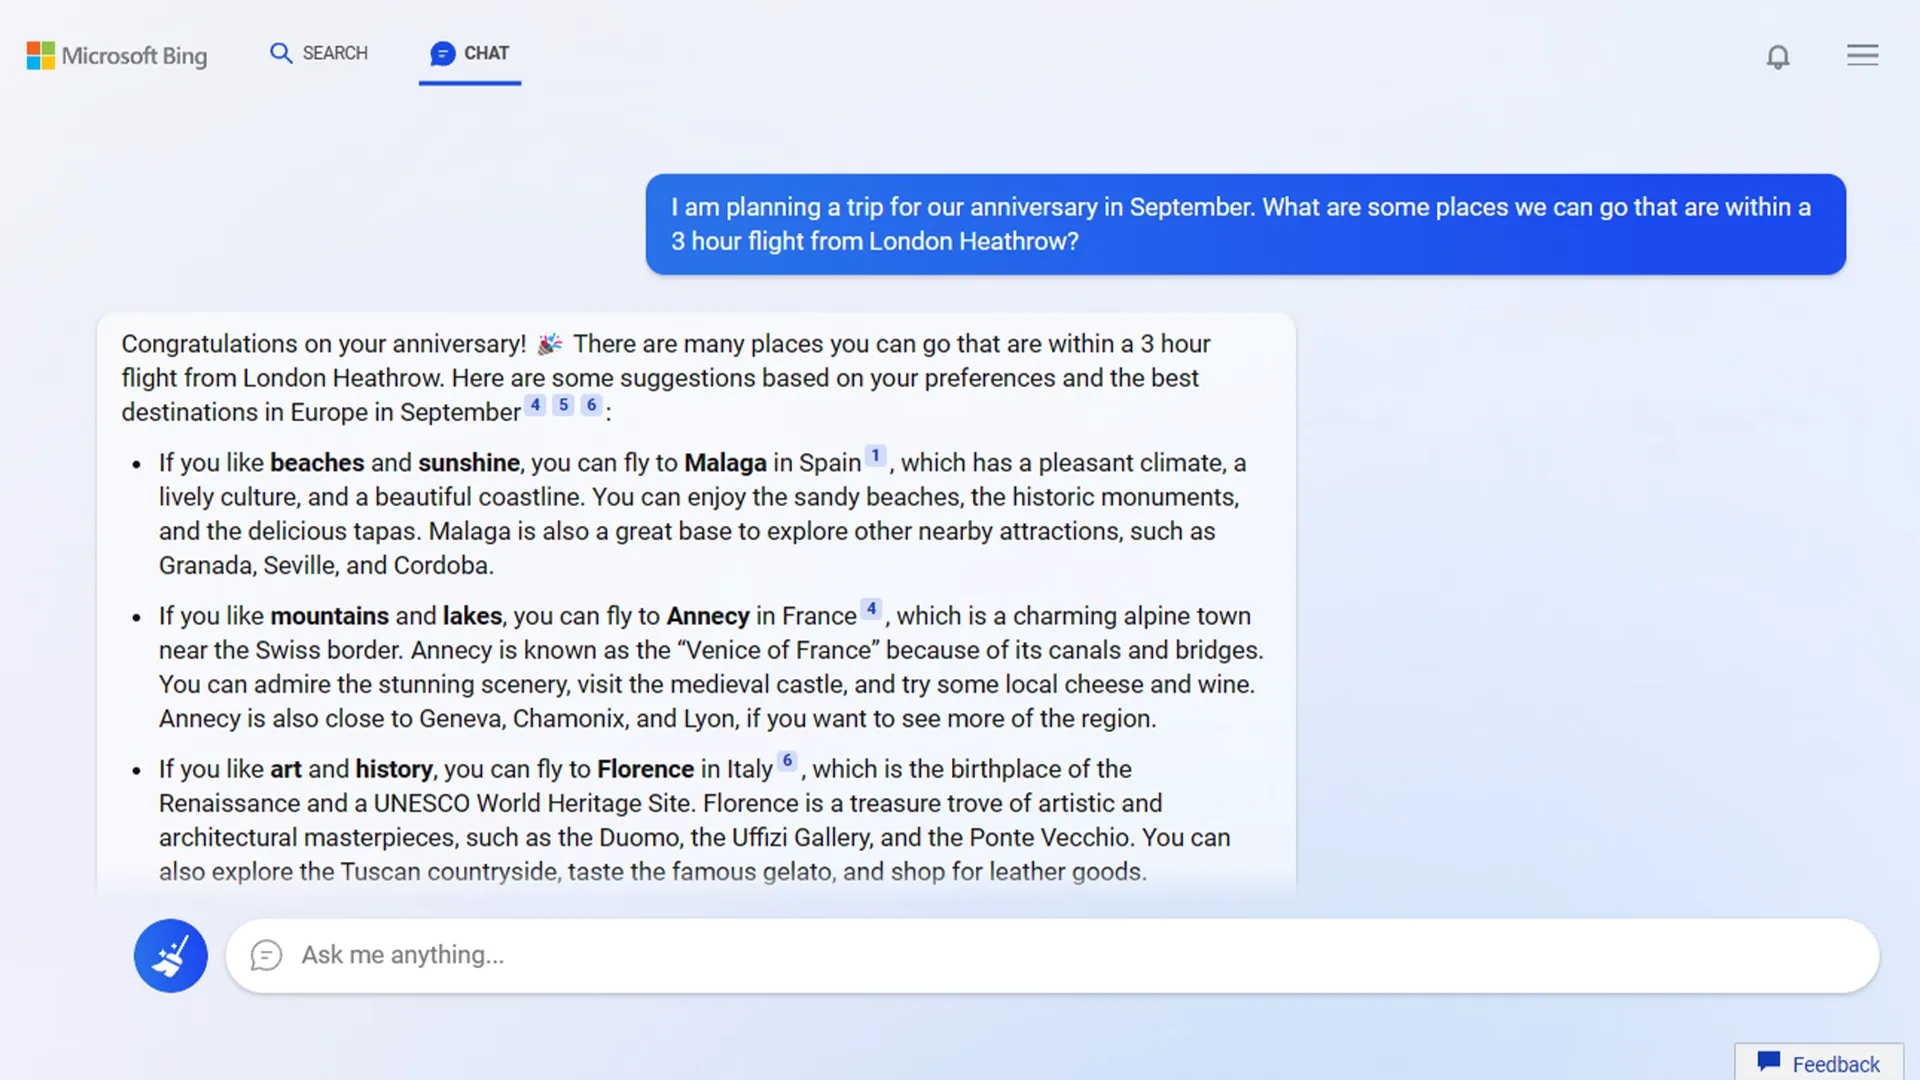 Screenshot of the chat interface in Bing